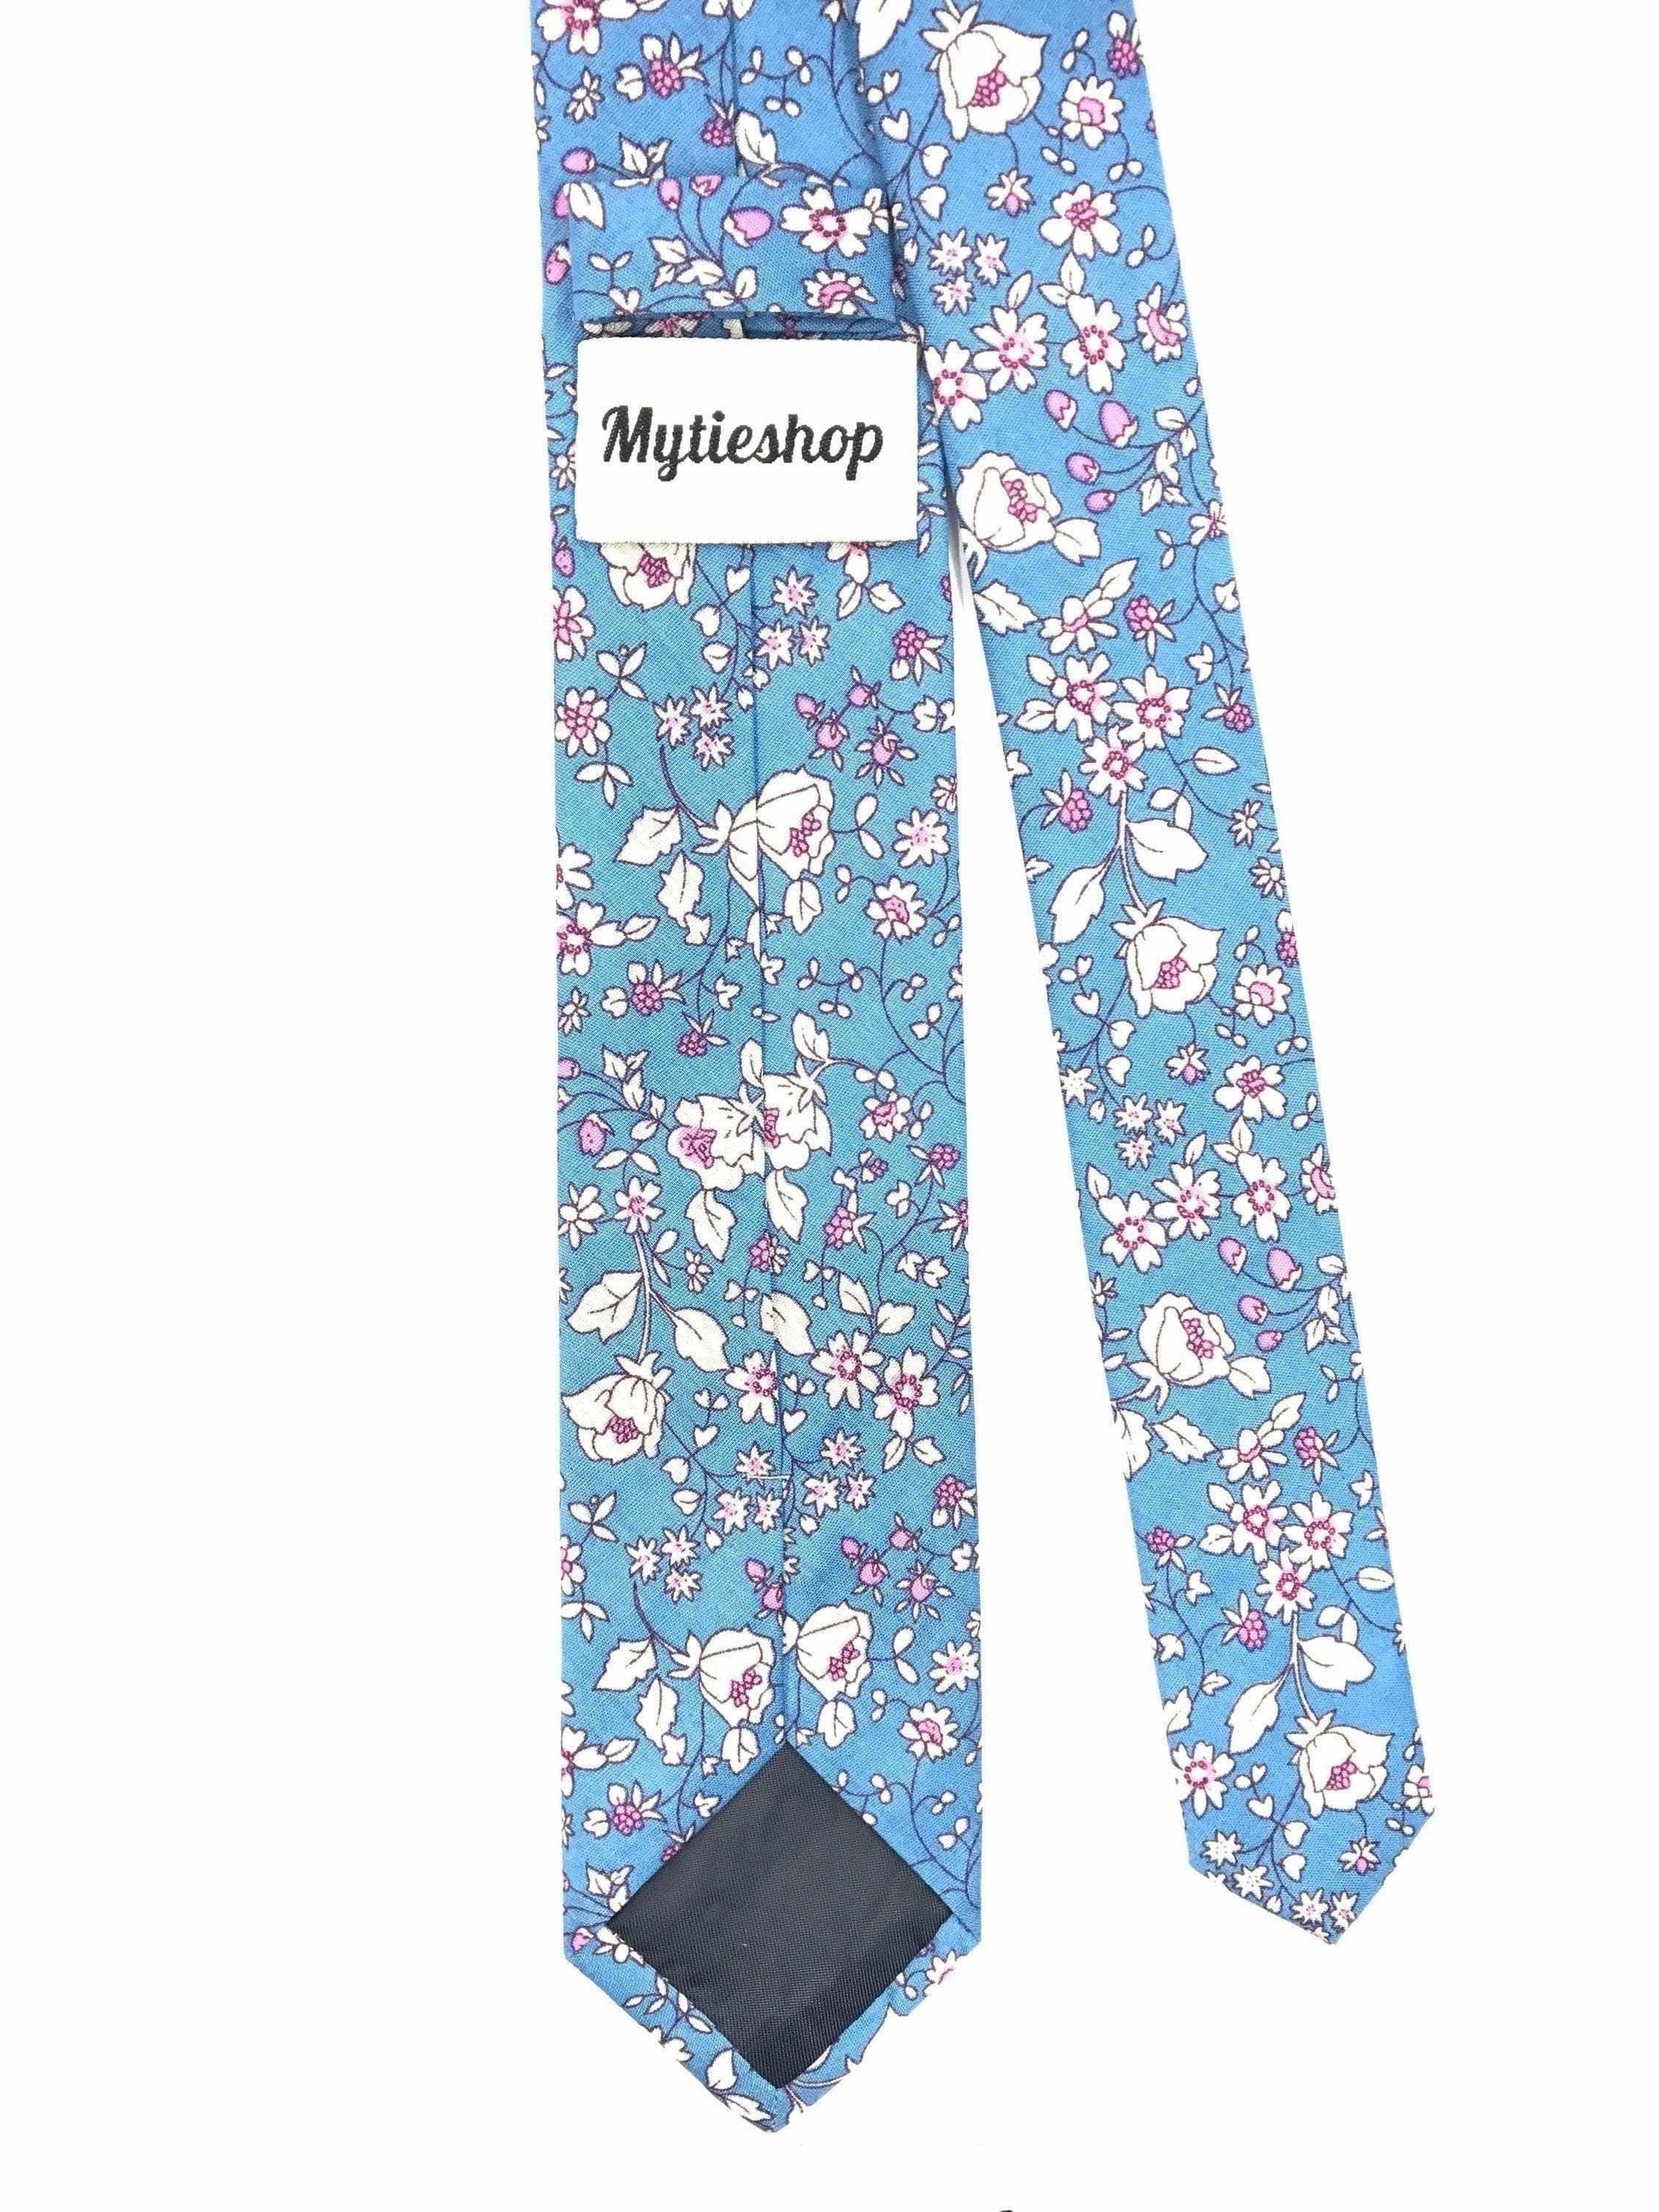 Light Blue Floral Tie Retro 2.36" Mytieshop - DAISY-Neckties-Light Blue Floral Tie Retro 2.36" Mytieshop DAISY for weddings and events, great for prom and anniversary gifts. Mens floral ties near me us ties-Mytieshop. Skinny ties for weddings anniversaries. Father of bride. Groomsmen. Cool skinny neckties for men. Neckwear for prom, missions and fancy events. Gift ideas for men. Anniversaries ideas. Wedding aesthetics. Flower ties. Dry flower ties.